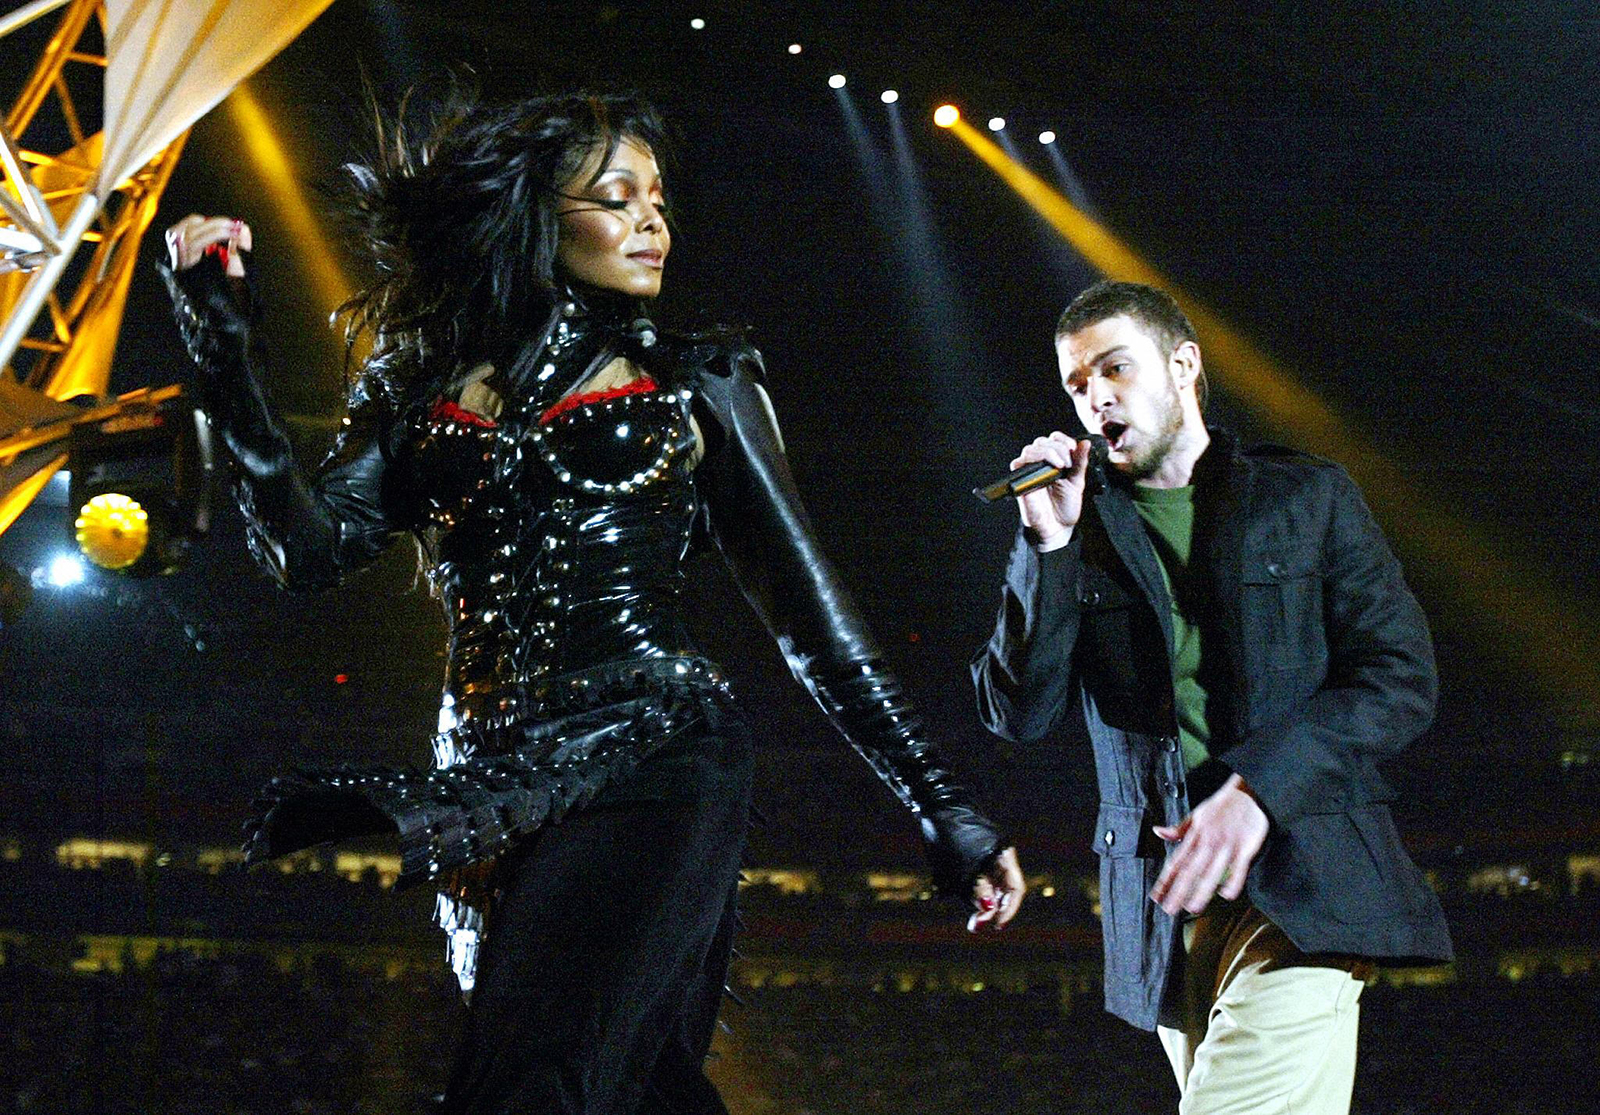 Janet Jackson and Justin Timberlake perform during halftime at the 2004 Super Bowl.